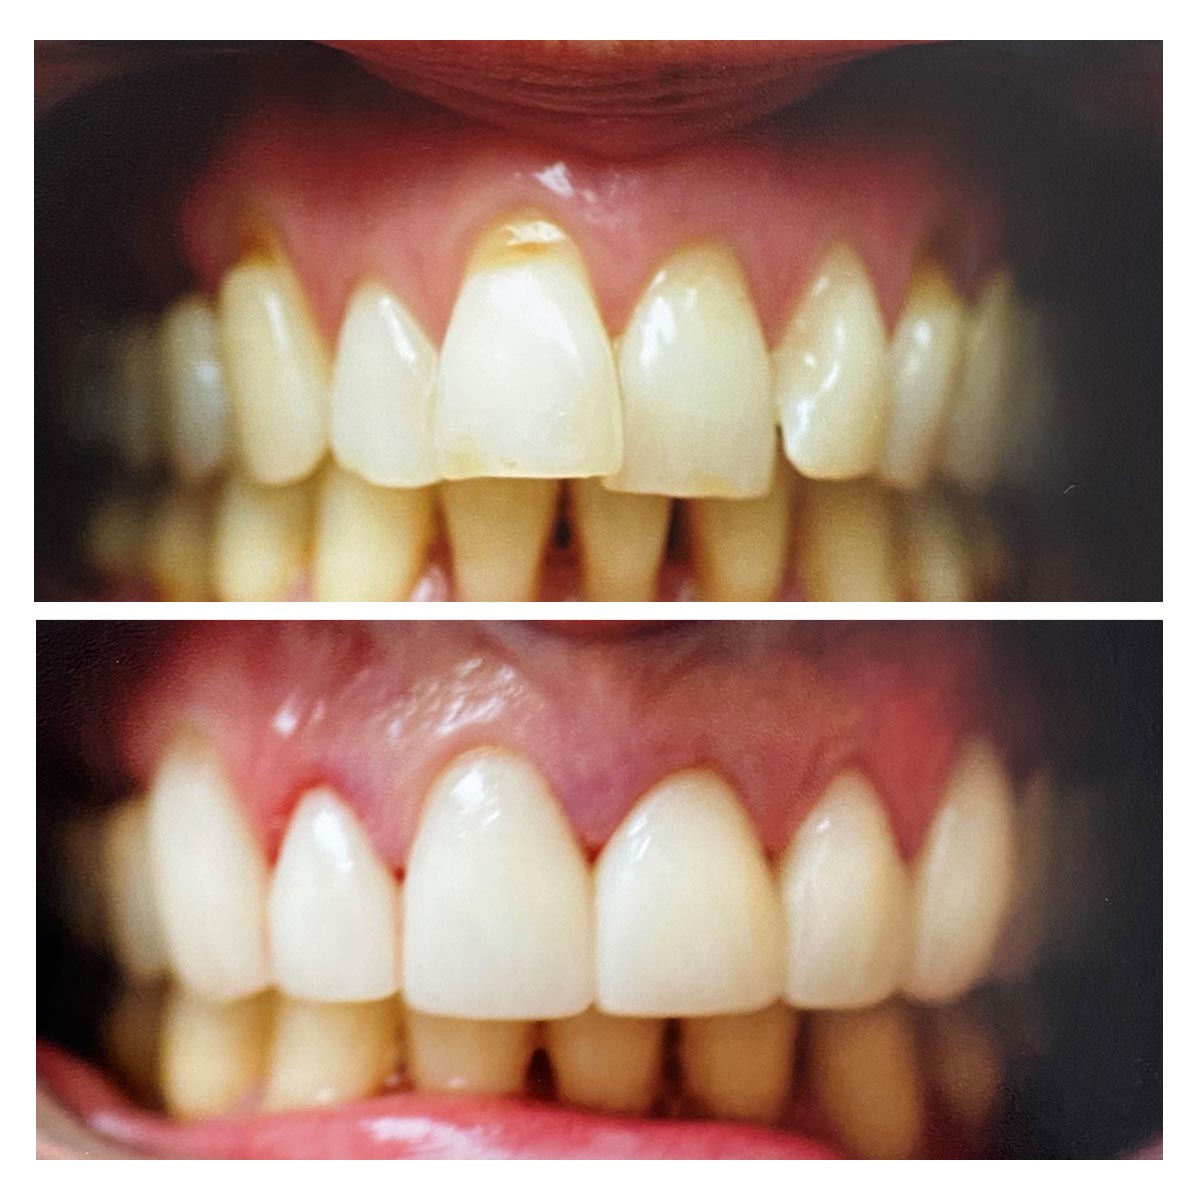 dr-verma-before-after (2)